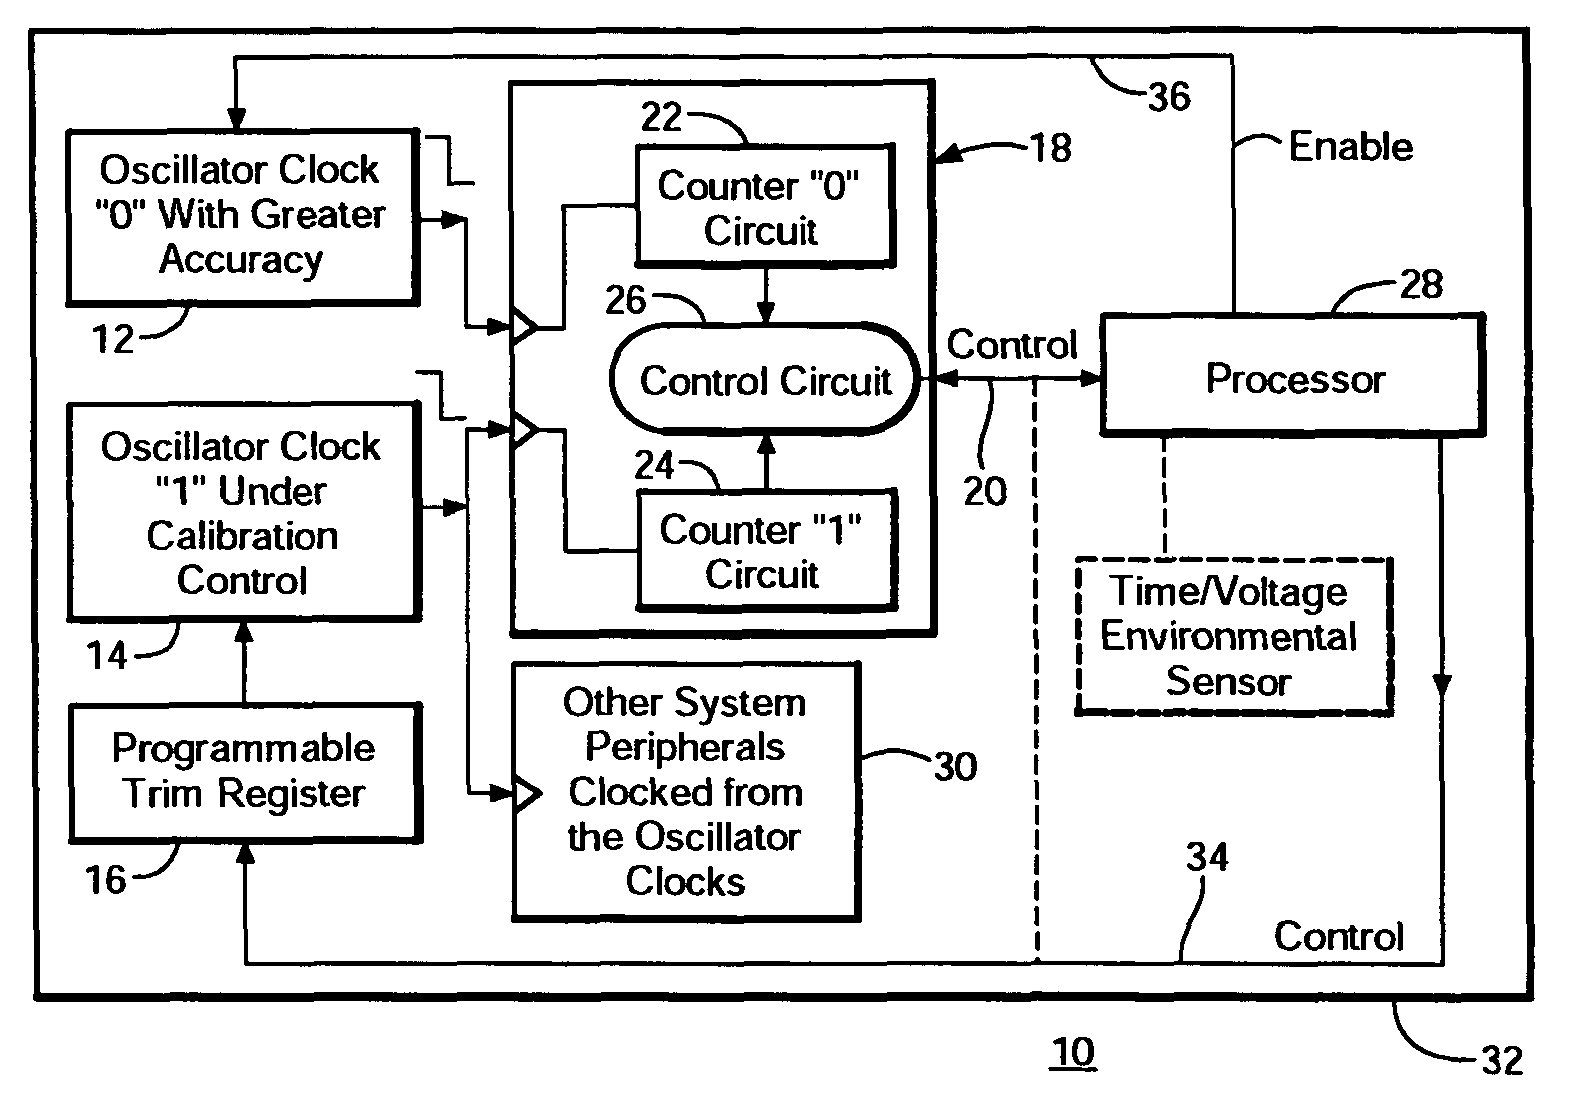 Microprocessor programmable clock calibration system and method